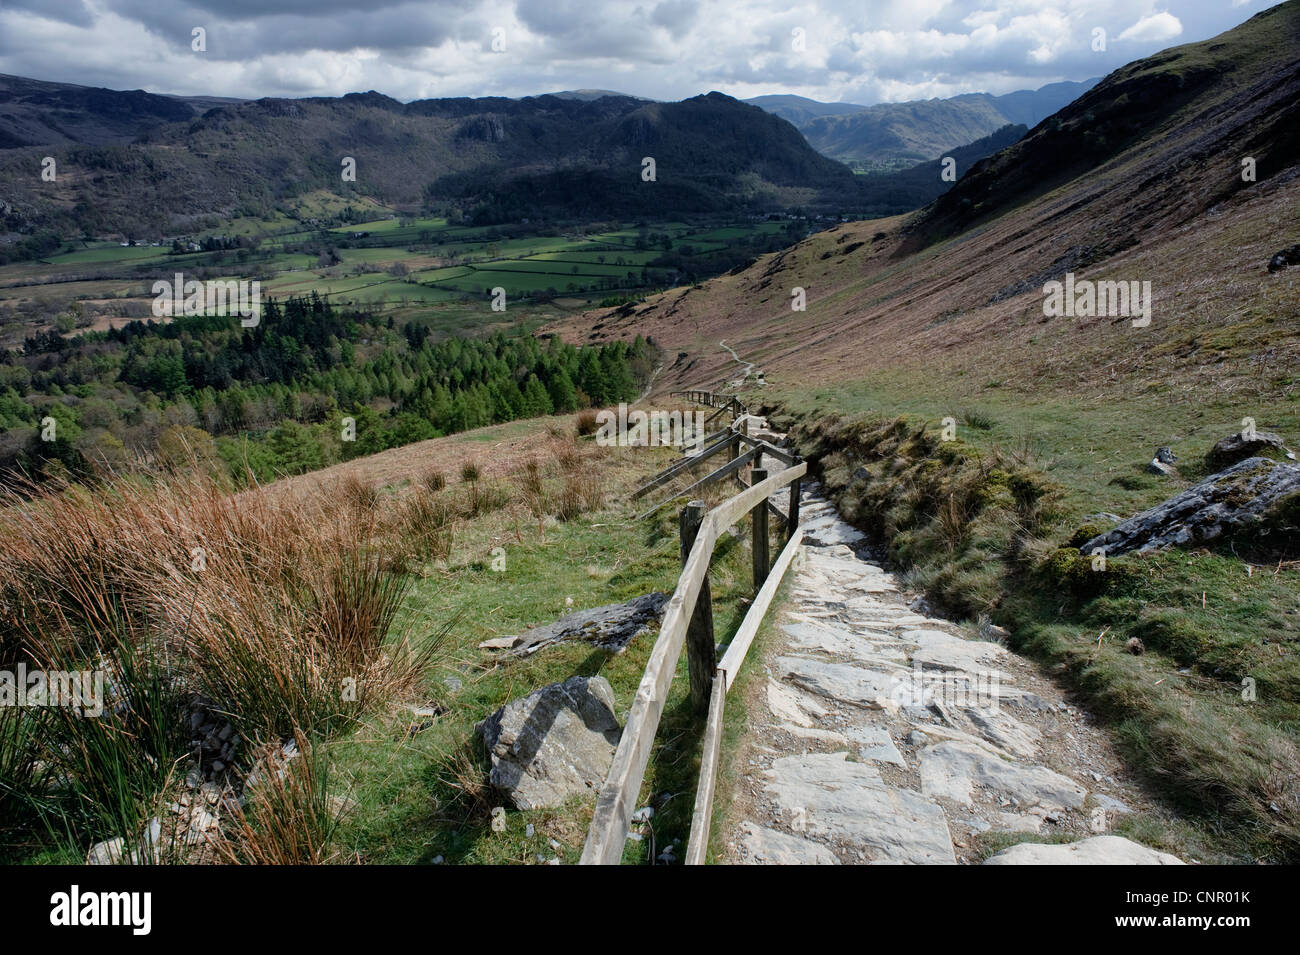 Photograph taken whilst descending Catbells, near Derwentwater, Cumbria, in the English Lake District. Stock Photo